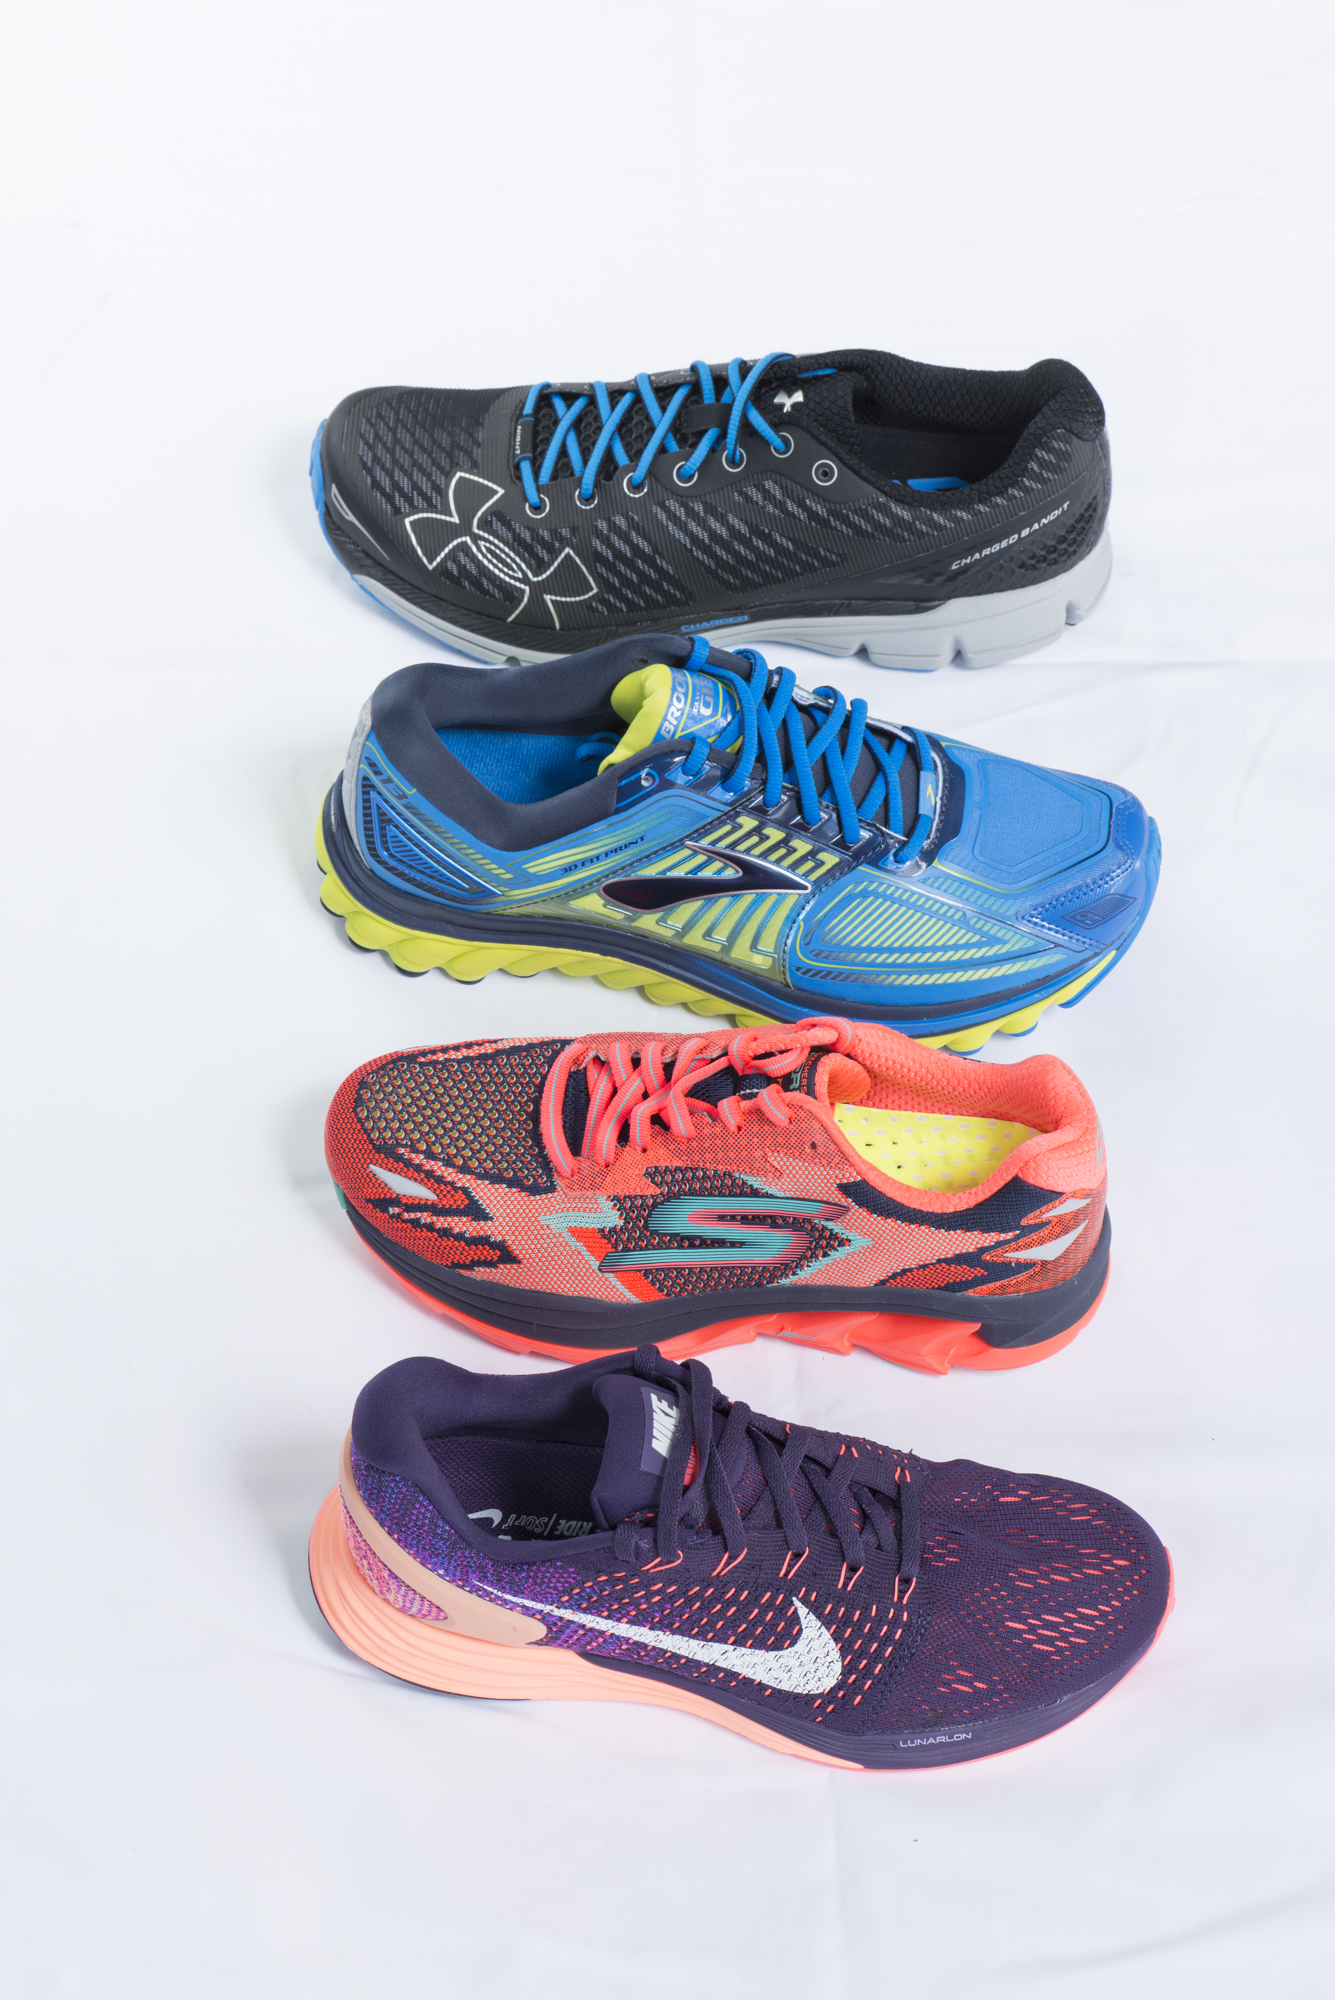 3 Shoe Trends to Watch in 2016 - Runner's World Australia and New Zealand